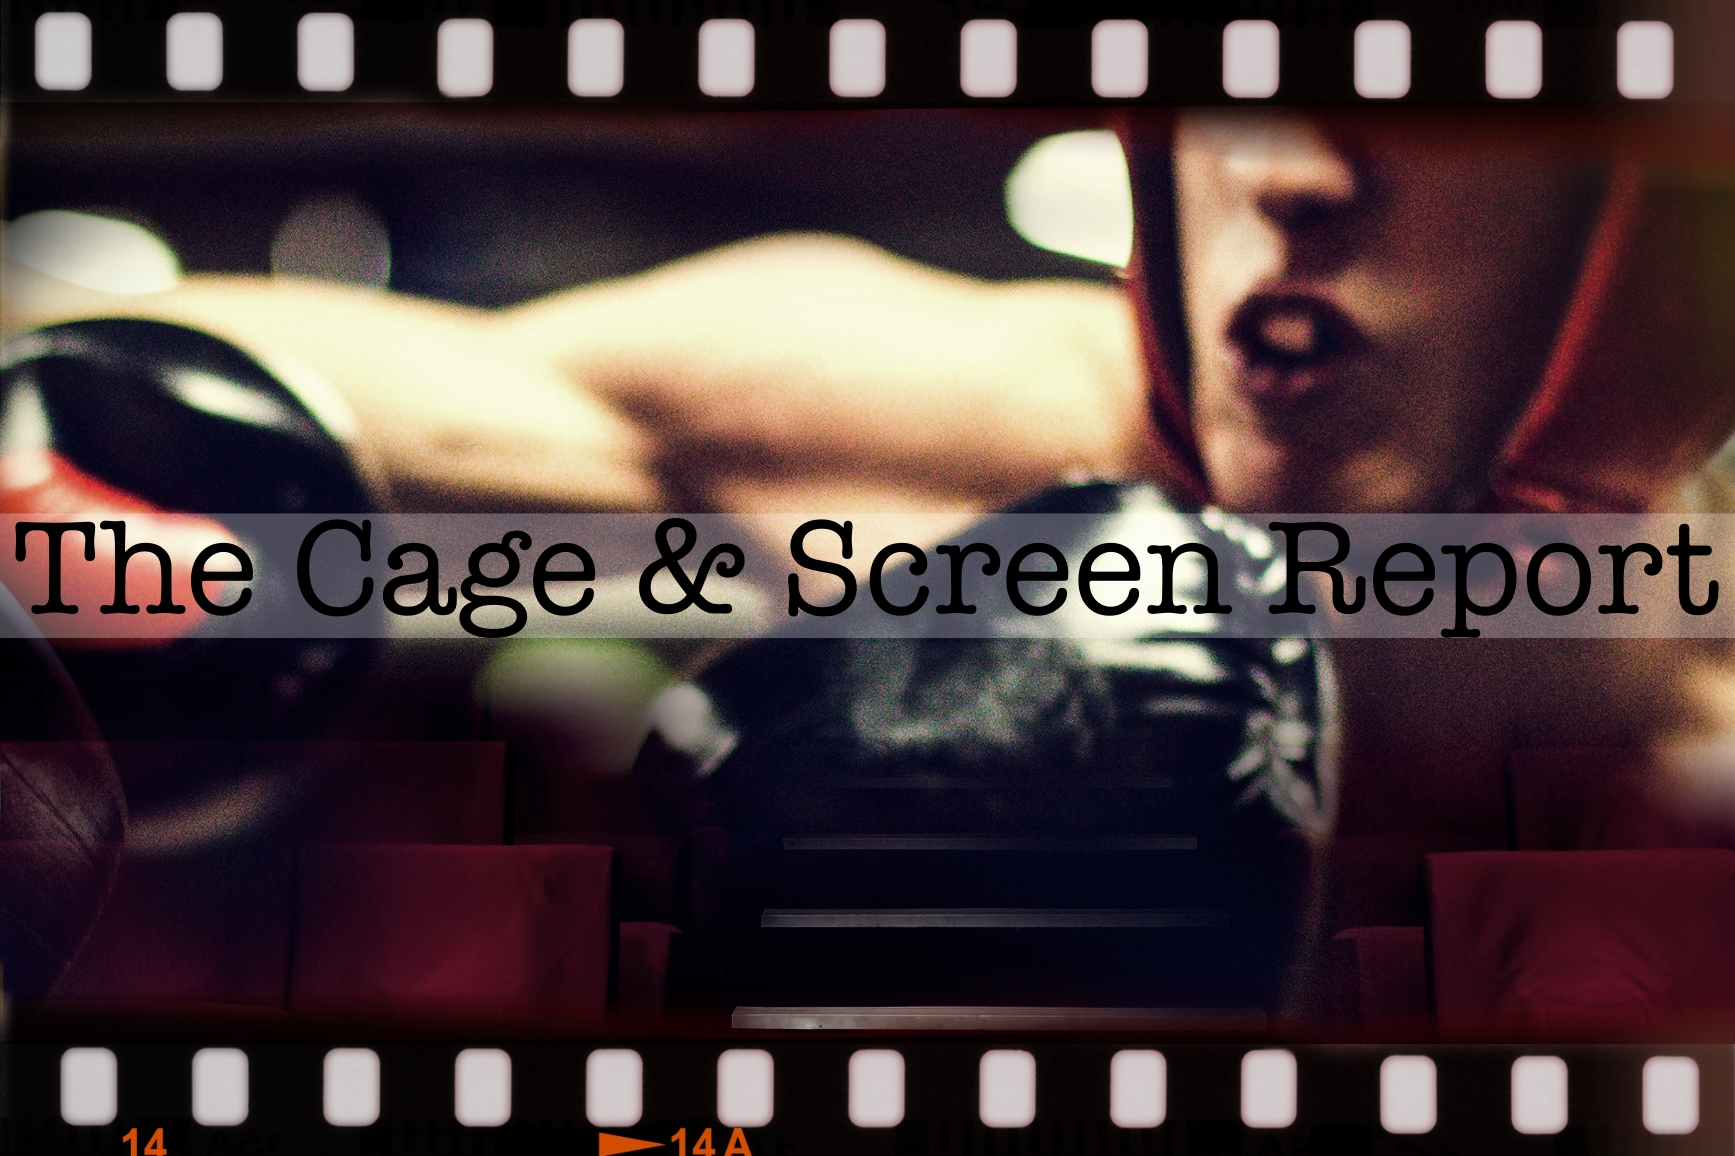 the cage & screen report header image